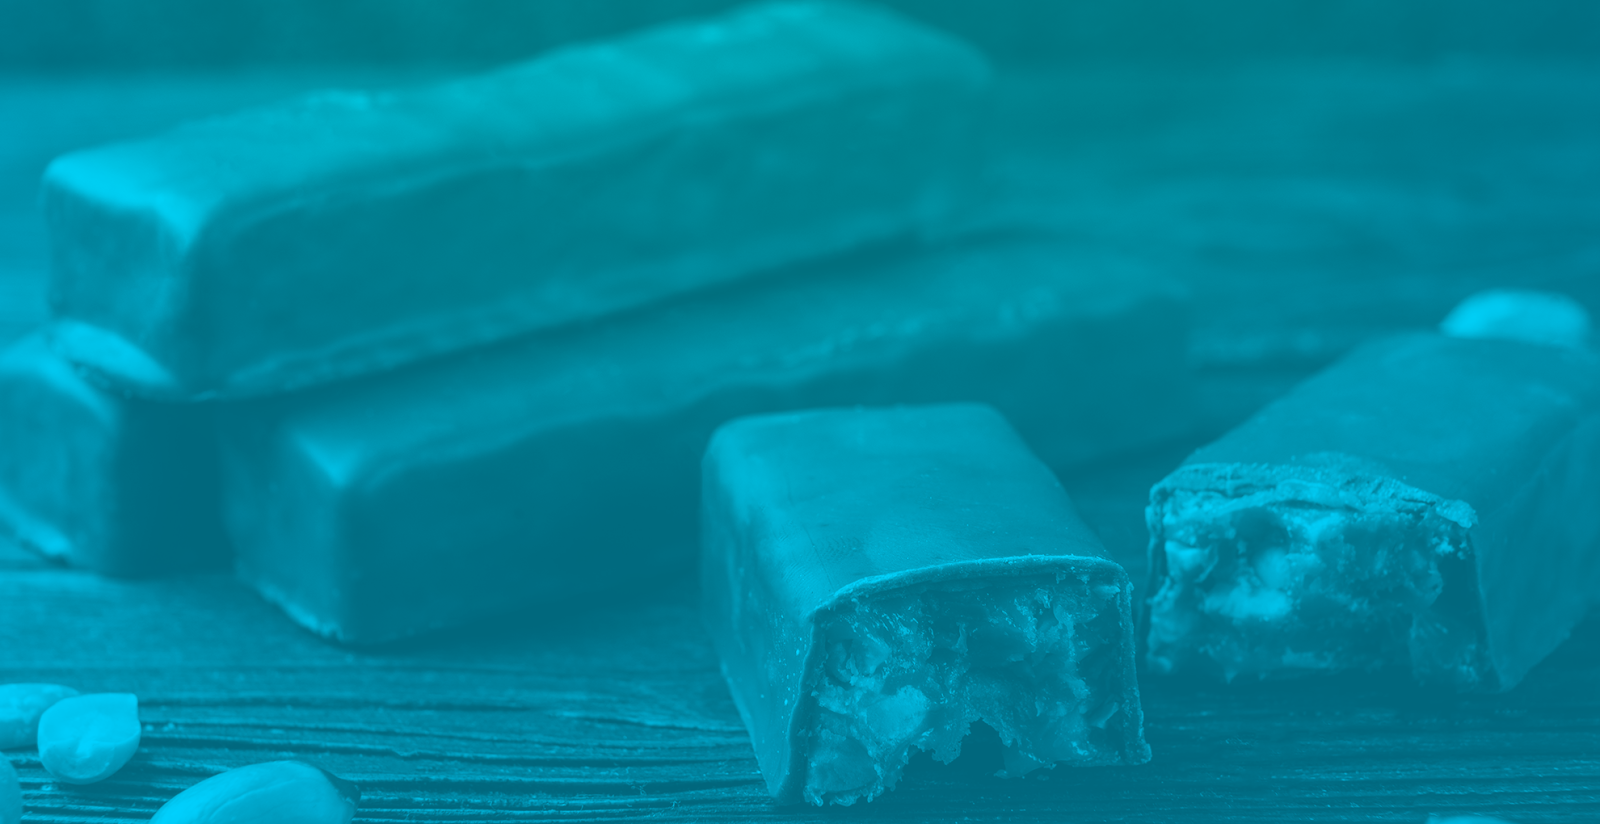 Close-up image of protein bars with a blue tint